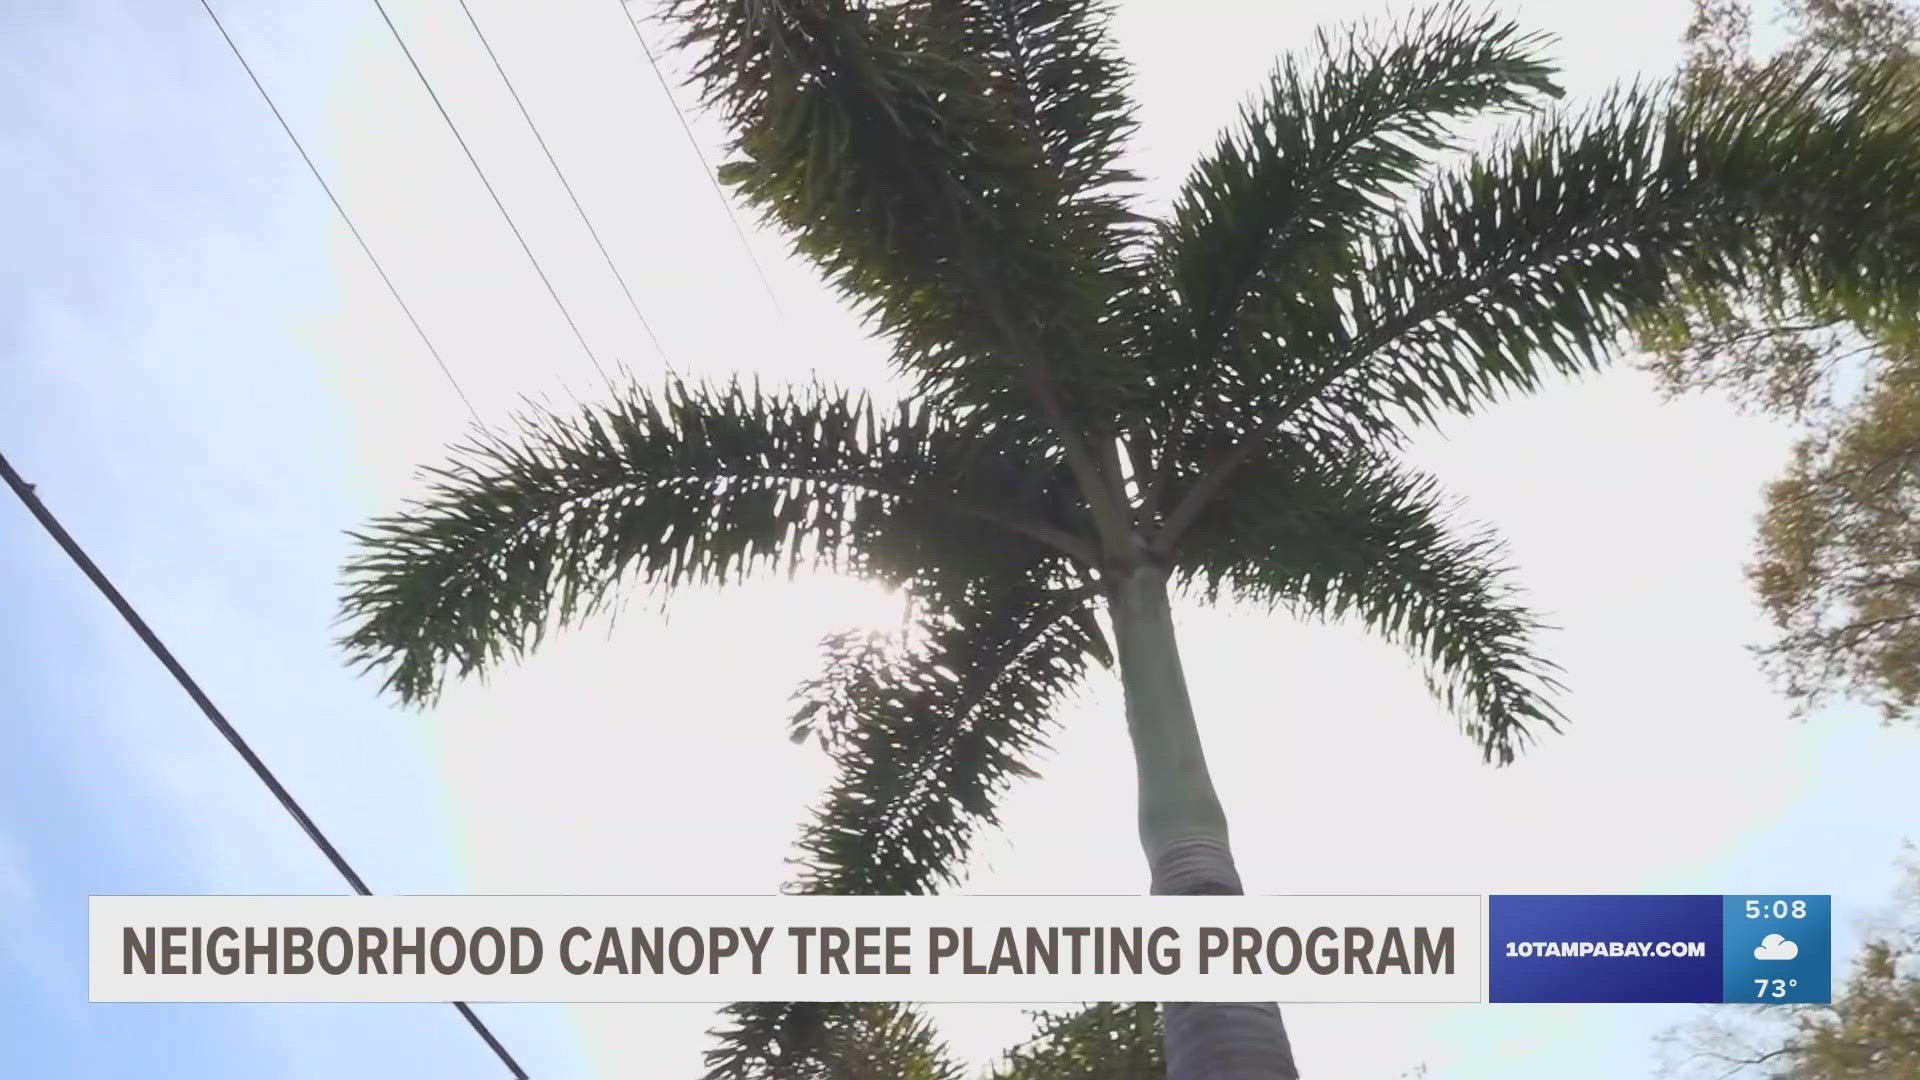 The Neighborhood Canopy Program offers a $500 incentive in to encourage homeowners to plant and maintain canopy trees.